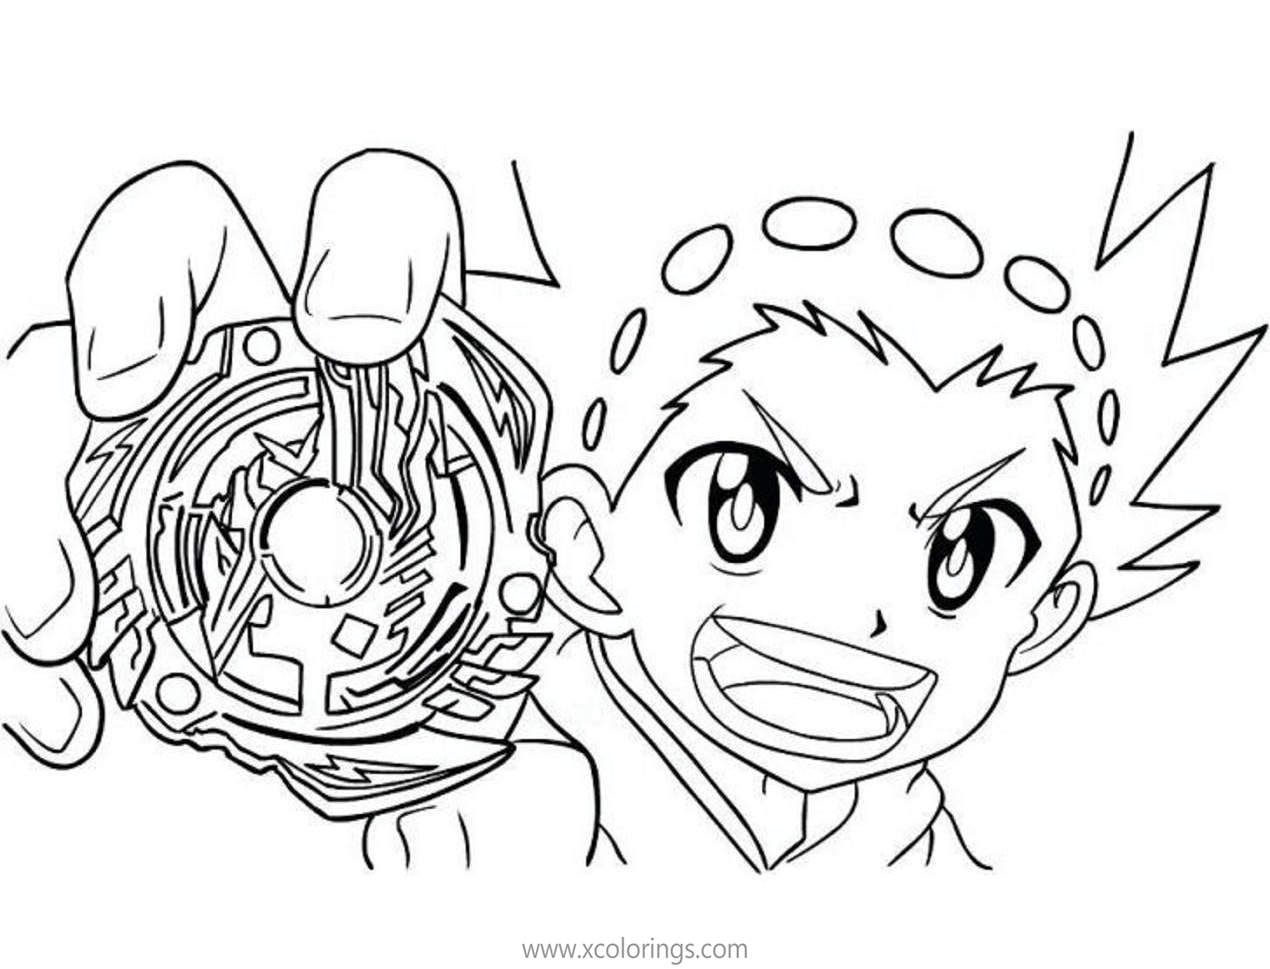 Beyblade Coloring Pages Valt Aoi With Beyblade - XColorings.com | Coloring  pages, Color, Black and white